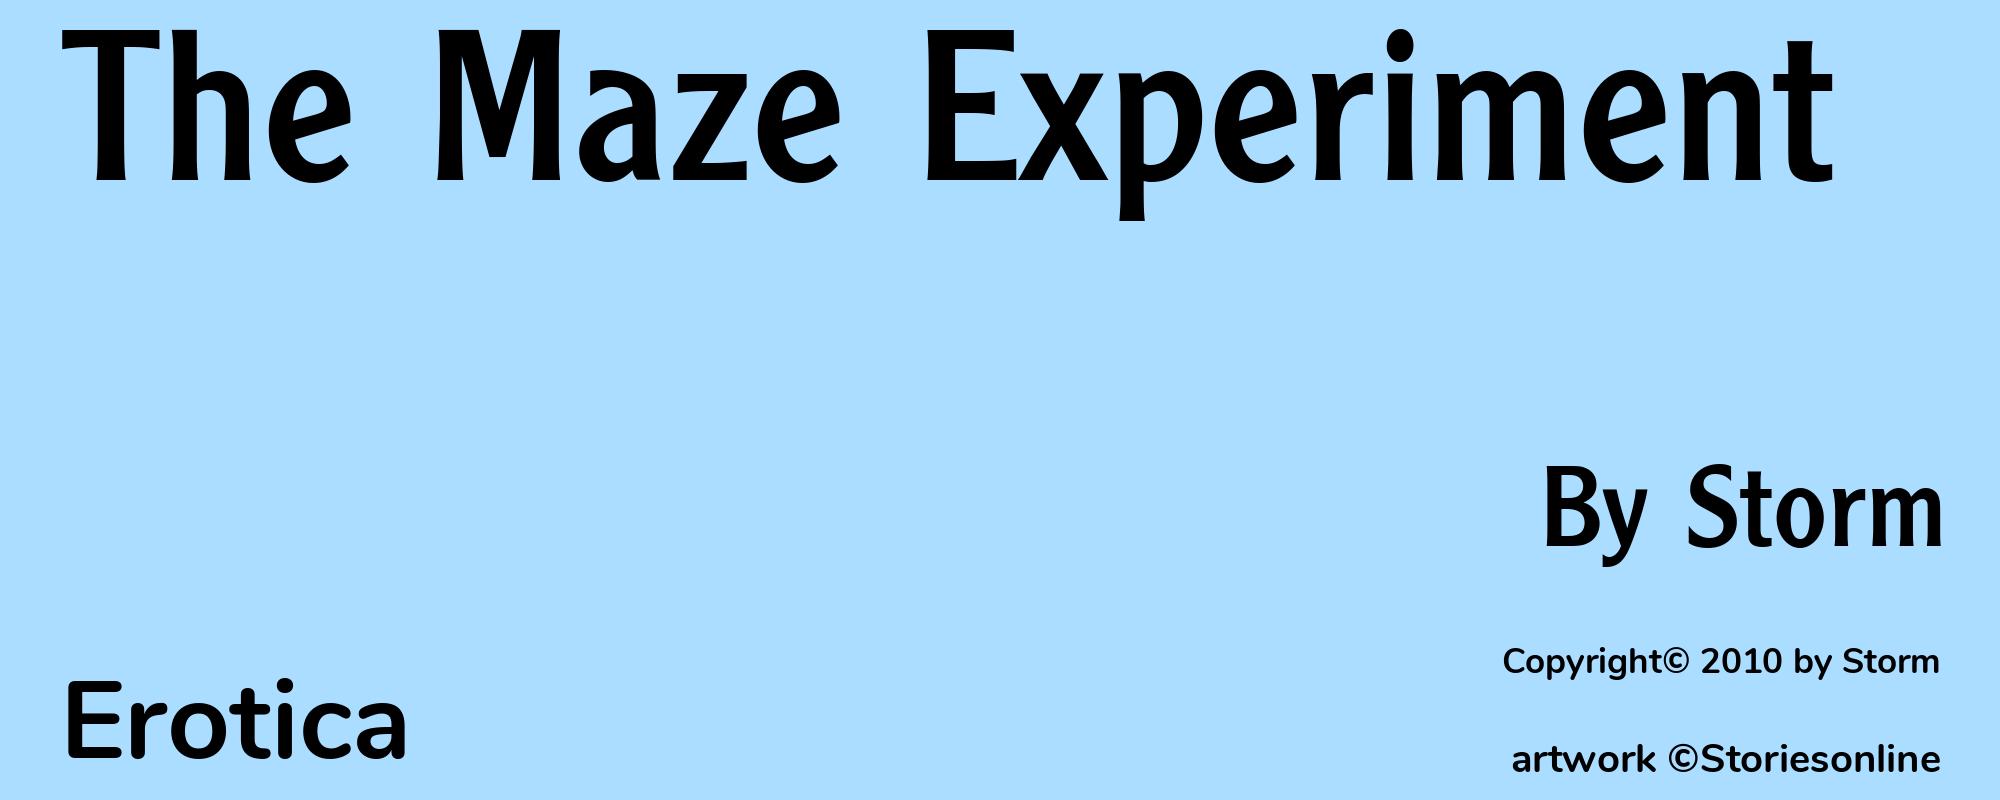 The Maze Experiment - Cover